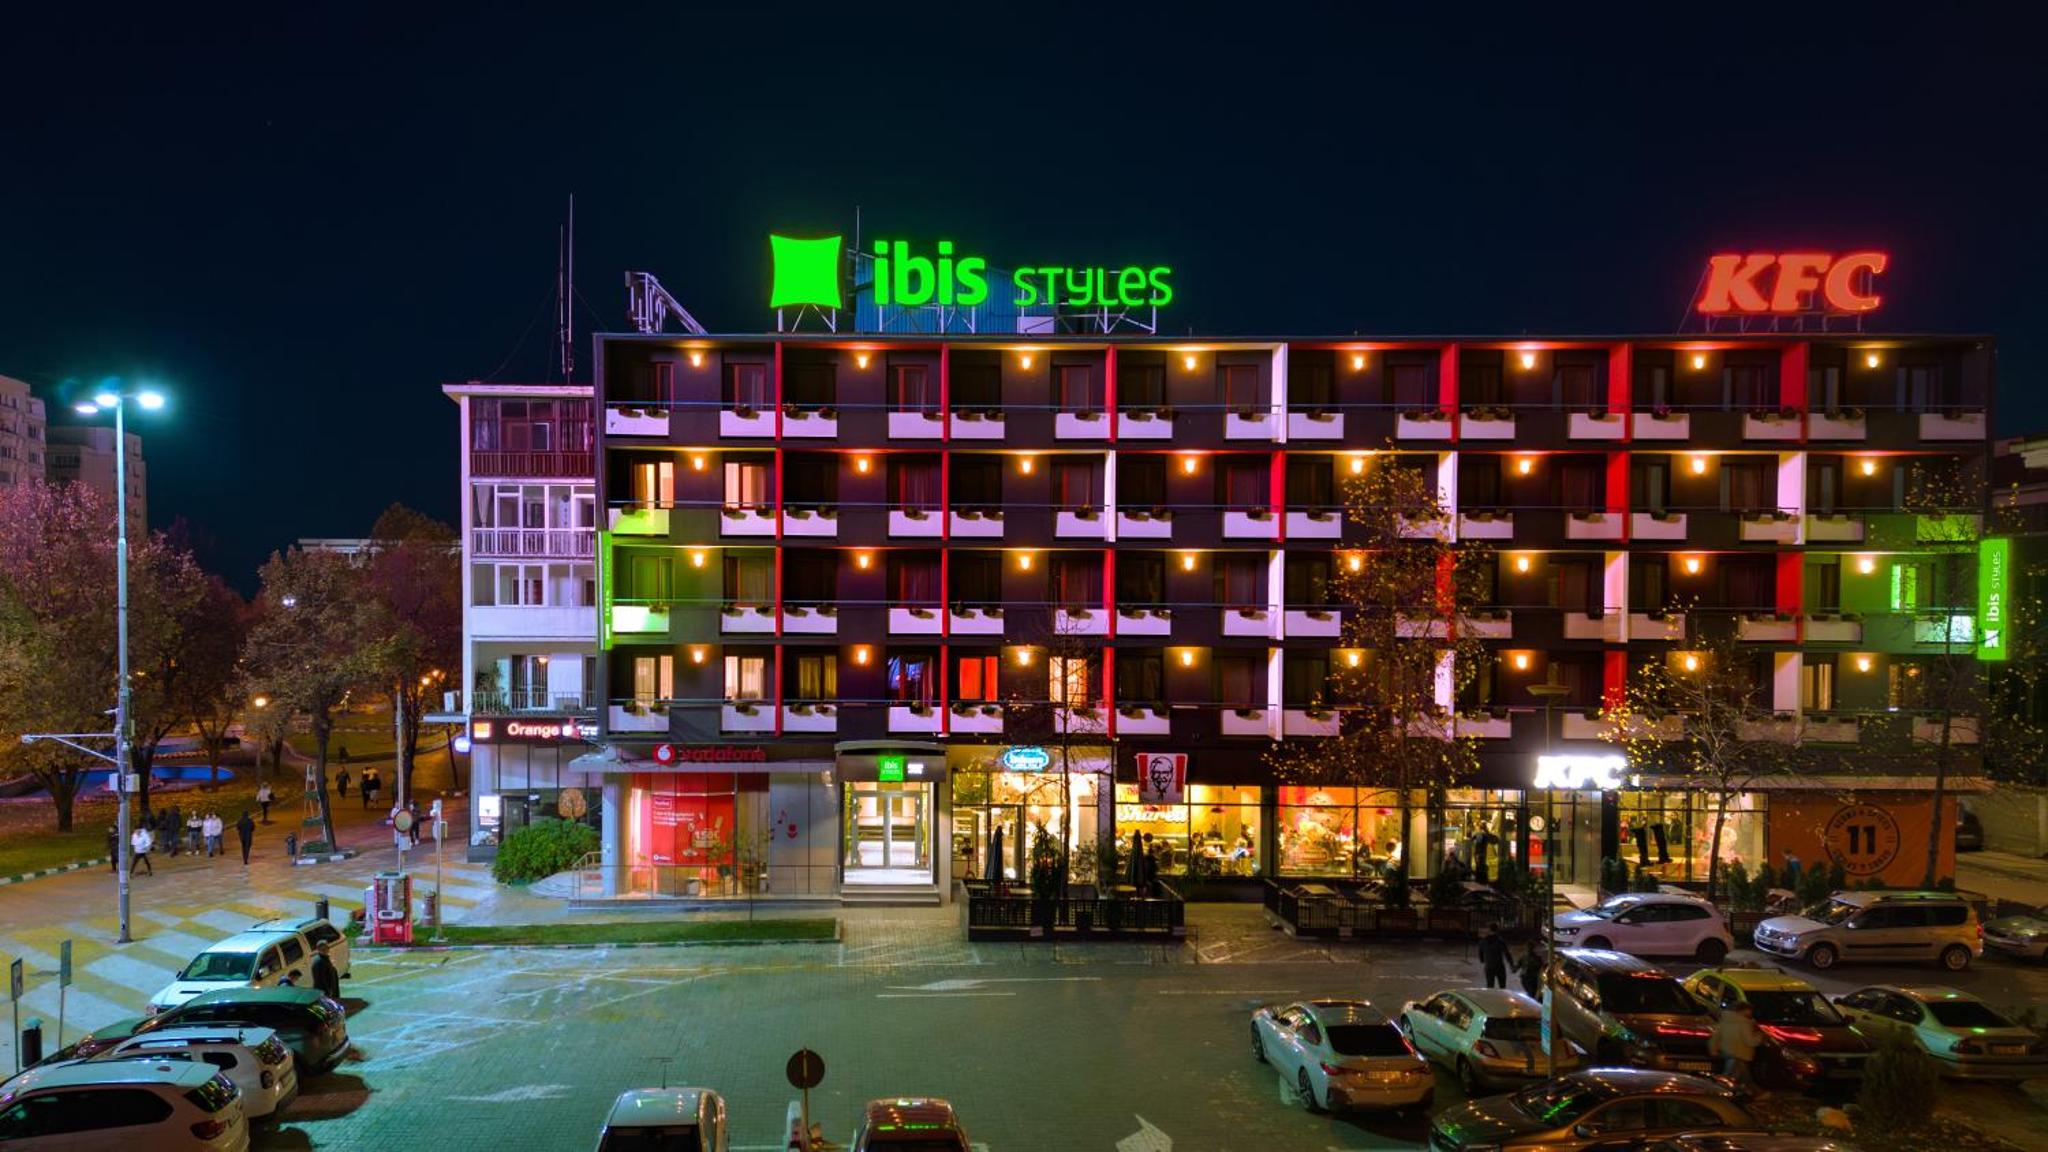 Hotel Arges